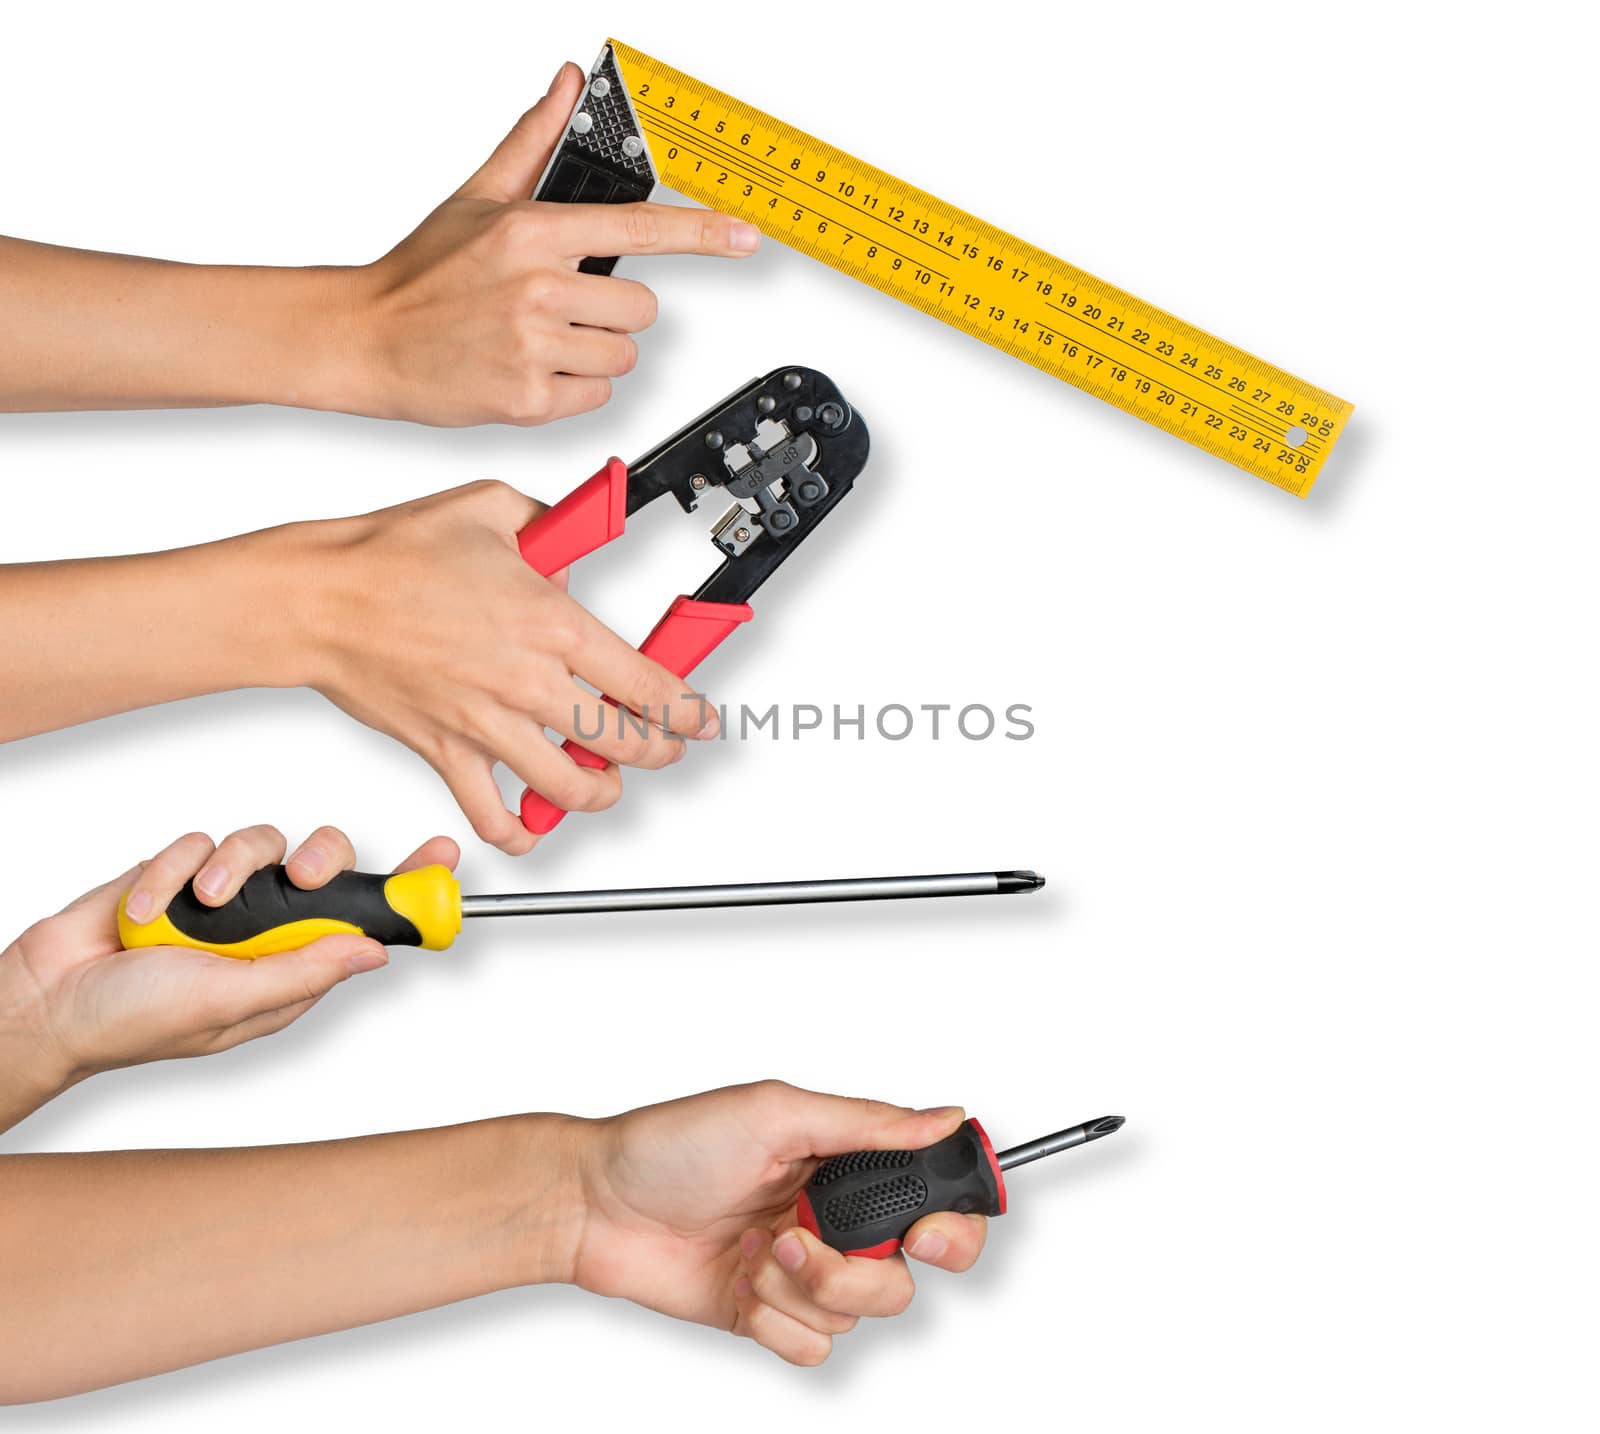 Peoples hands holding different tools on isolated white background